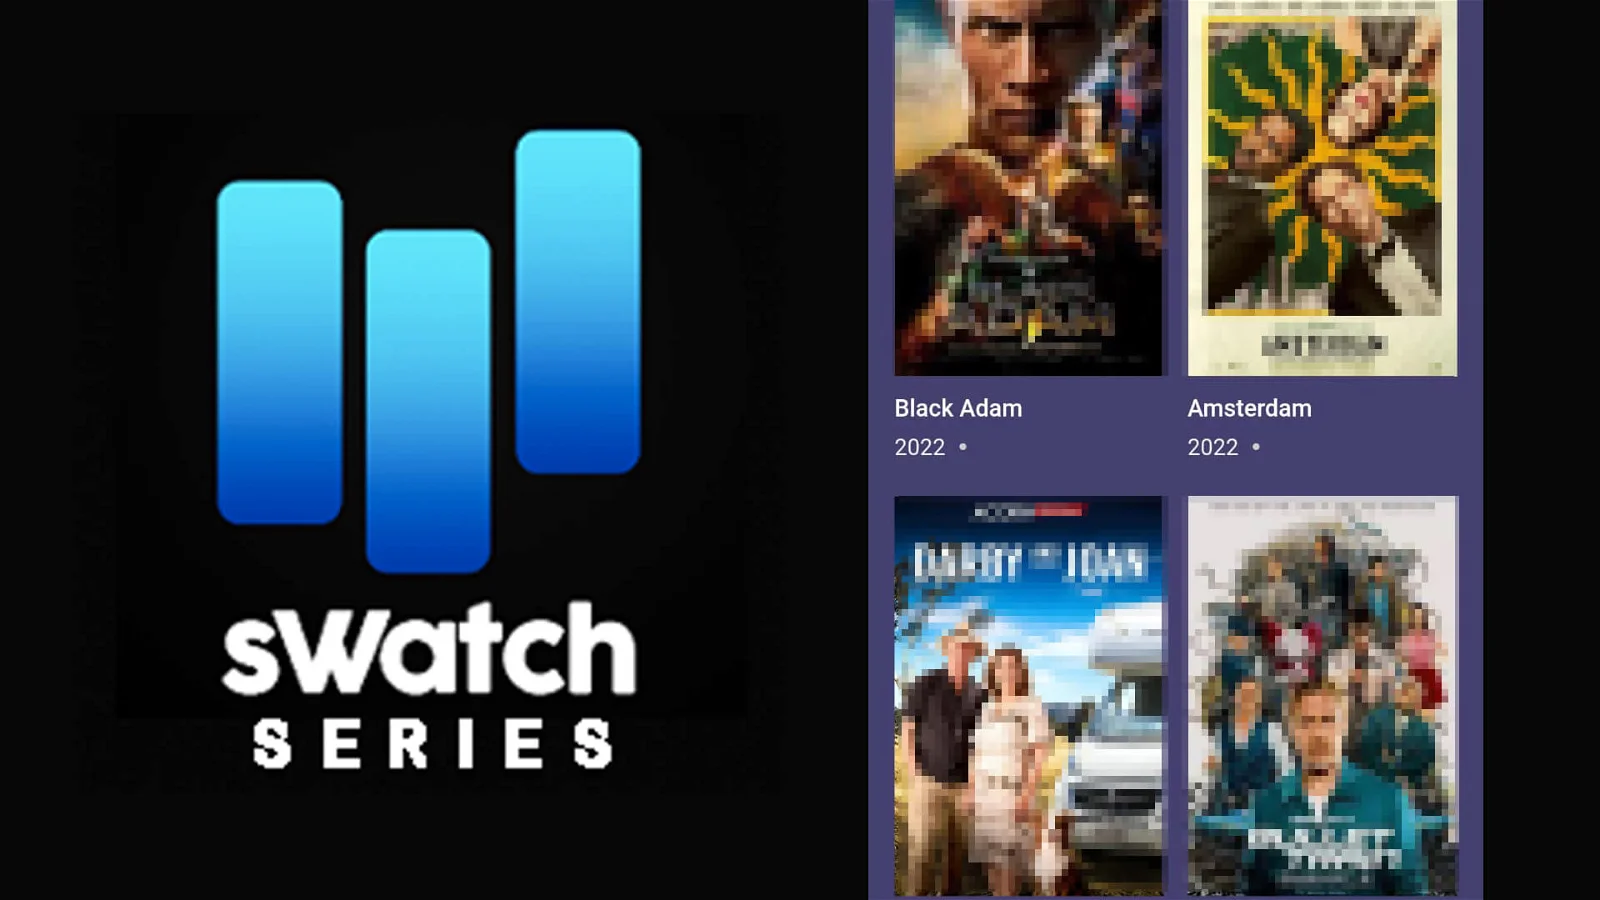 Watching Swatch Series Movies And Web Shows Online: Detailed Guide